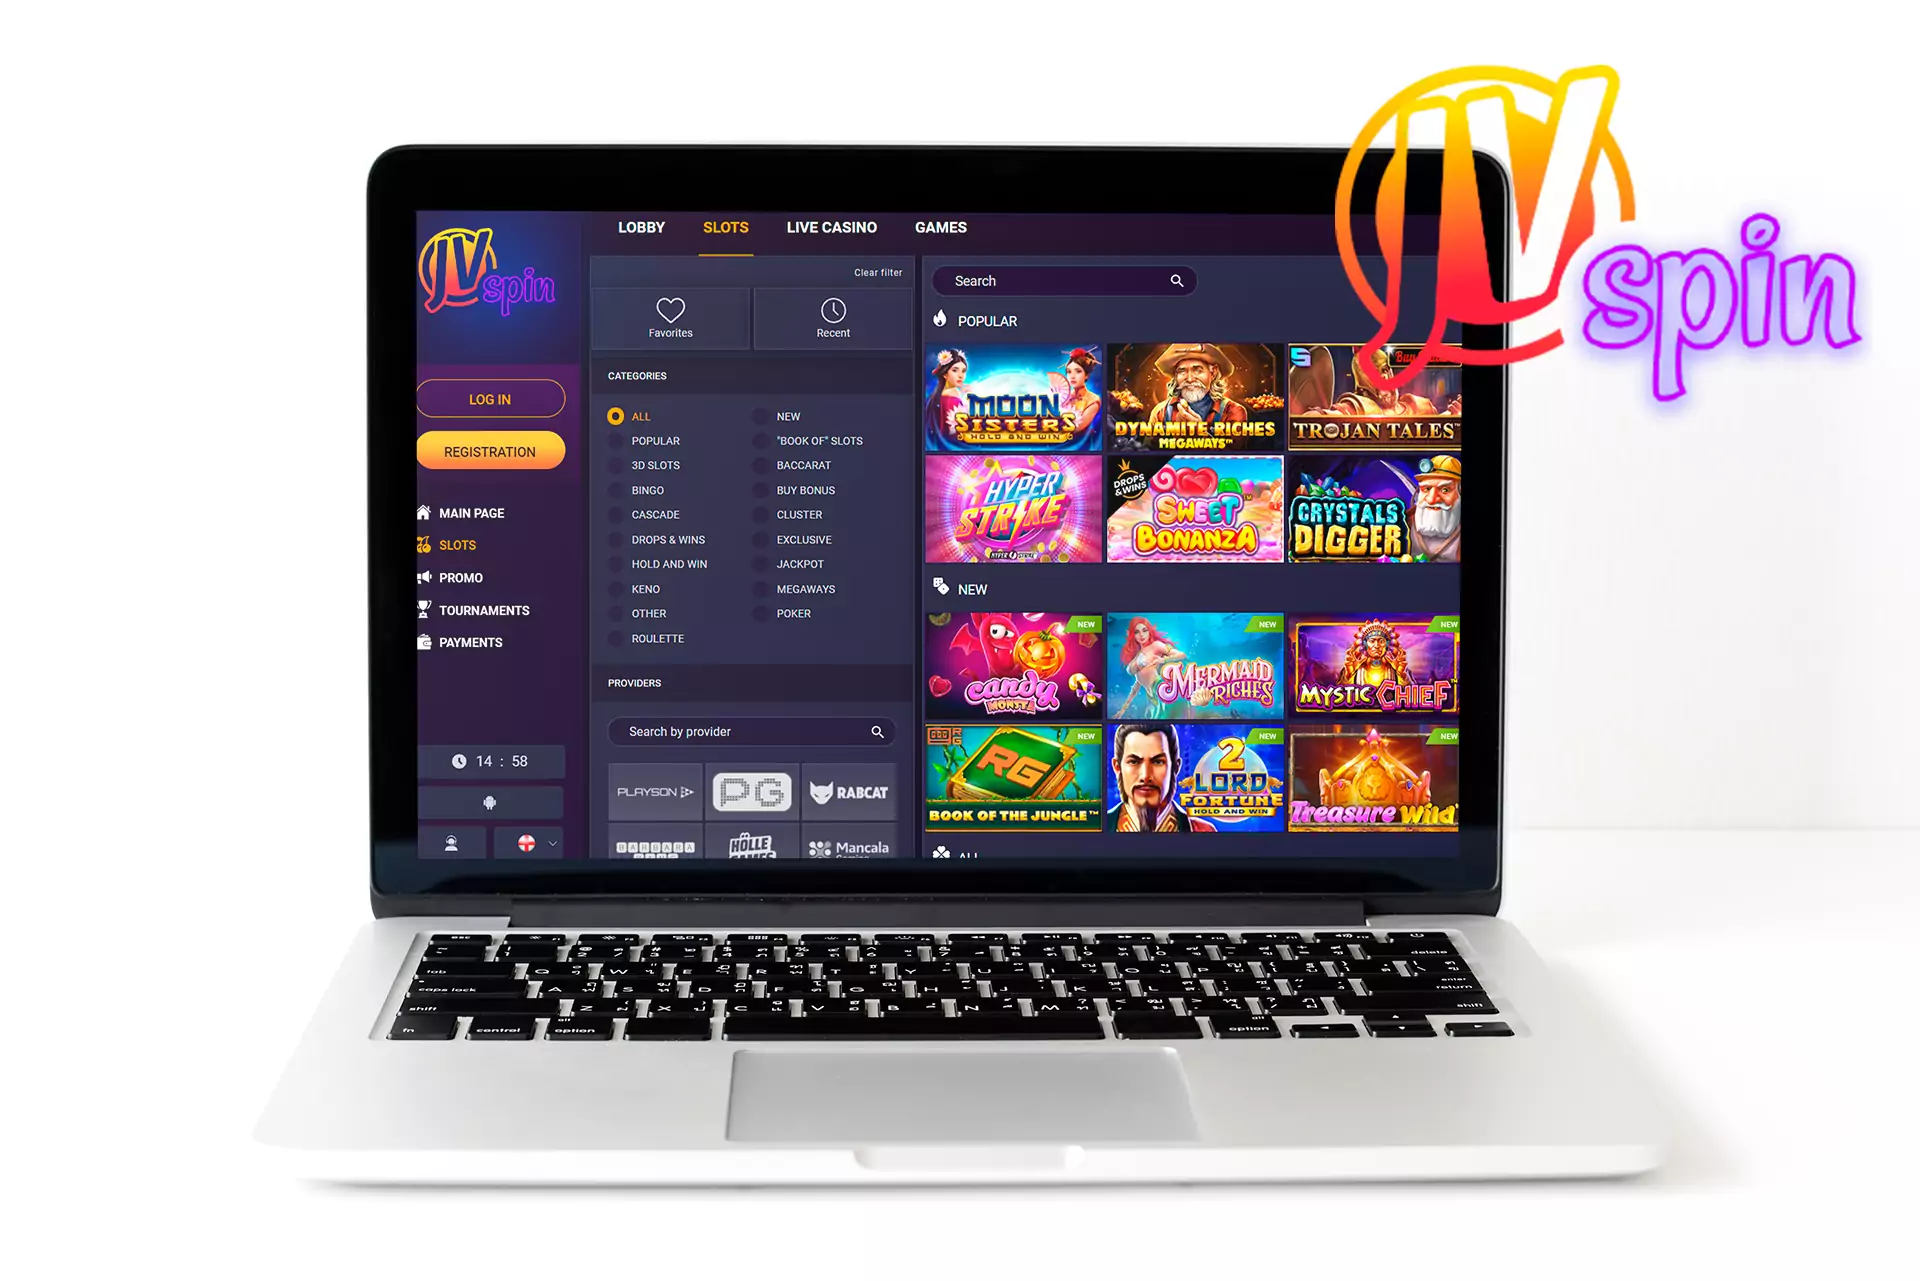 Register at the popular Indian online casino JVSpin and win big money.